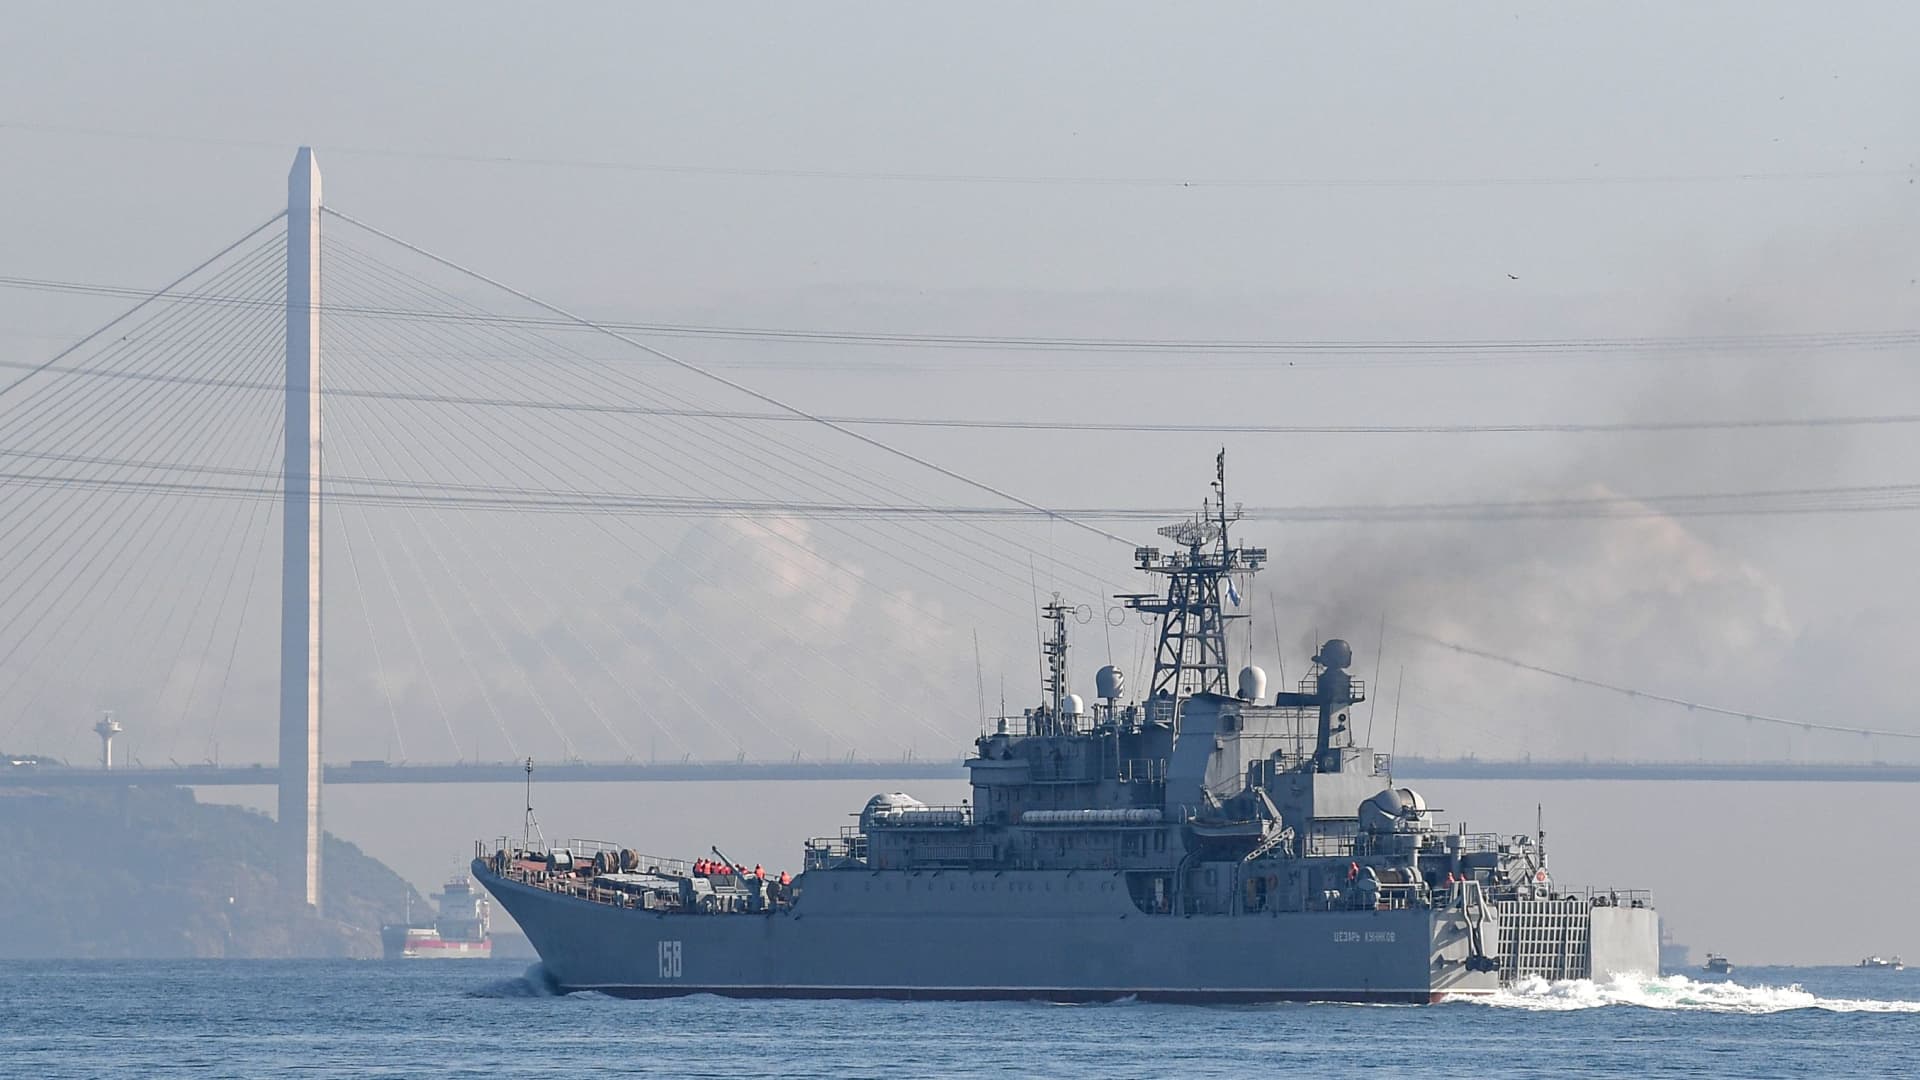 Russian warship BSF Tsezar Kunikov 158 sails through the Bosphorus Strait off the coast of the city of Istanbul on her way to the Black Sea as its returns from the port of Tartus, western Syria on September 26, 2019. 